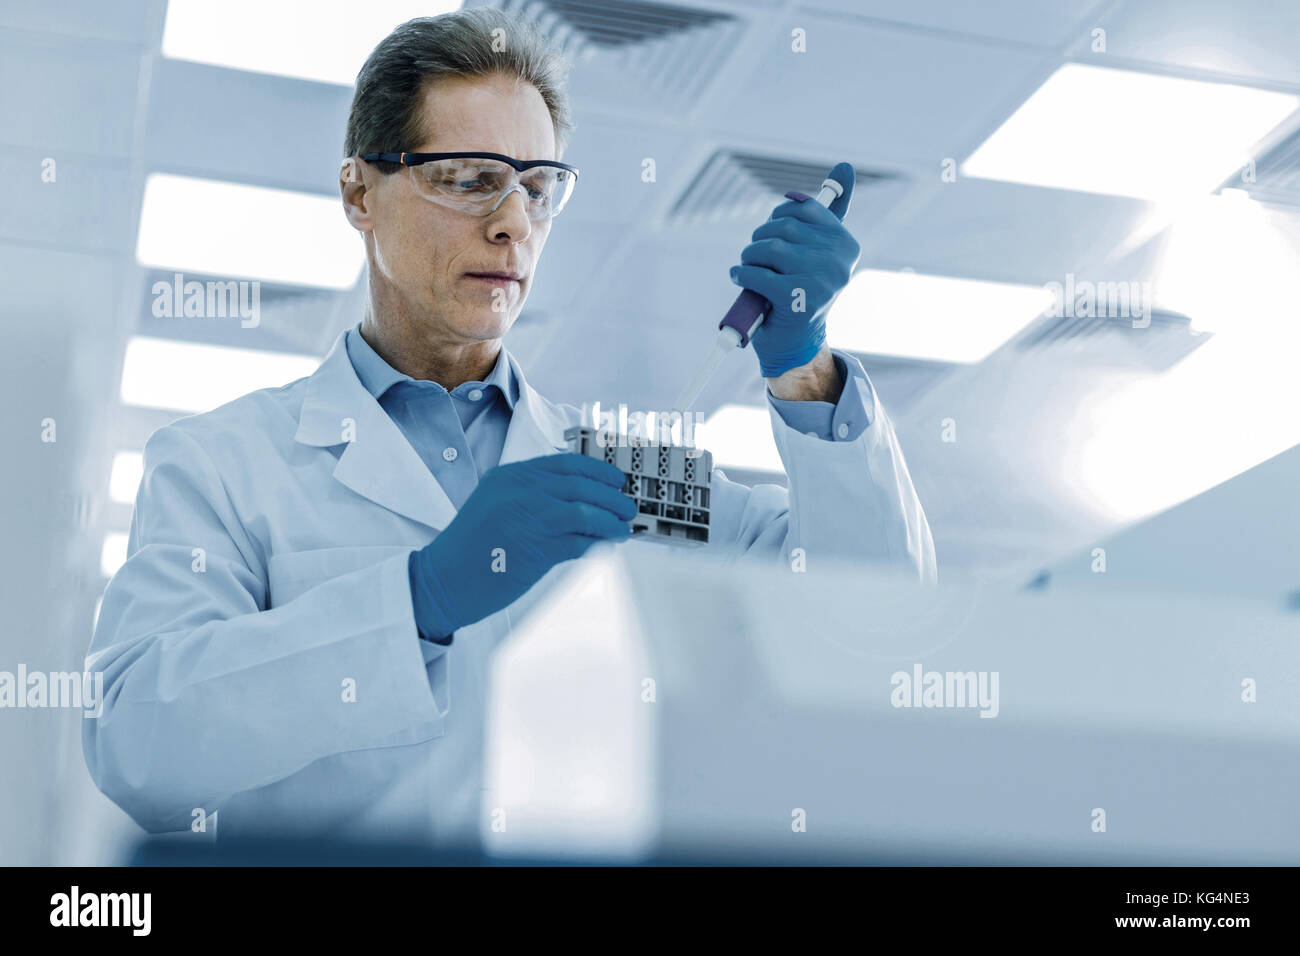 Handsome nice scientist focusing on his task Stock Photo